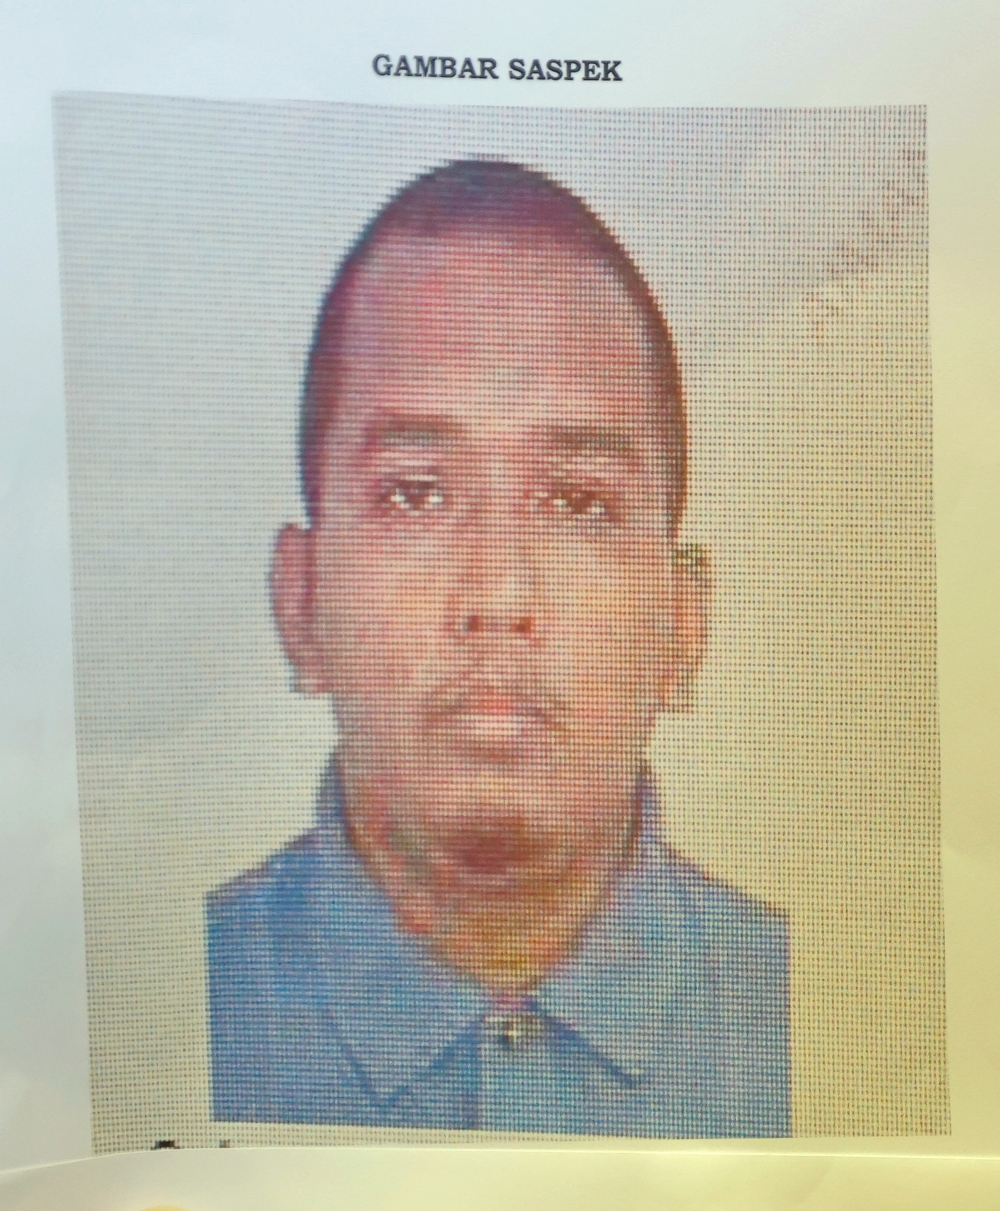 The suspected shooter who fled the scene was named as Hafizul Harawi, 38, Bukit Aman Criminal Investigation Department (CID) director Commissioner Datuk Seri Mohd Shuhaily Mohd Zain told a news conference at KLIA. — Bernama pic